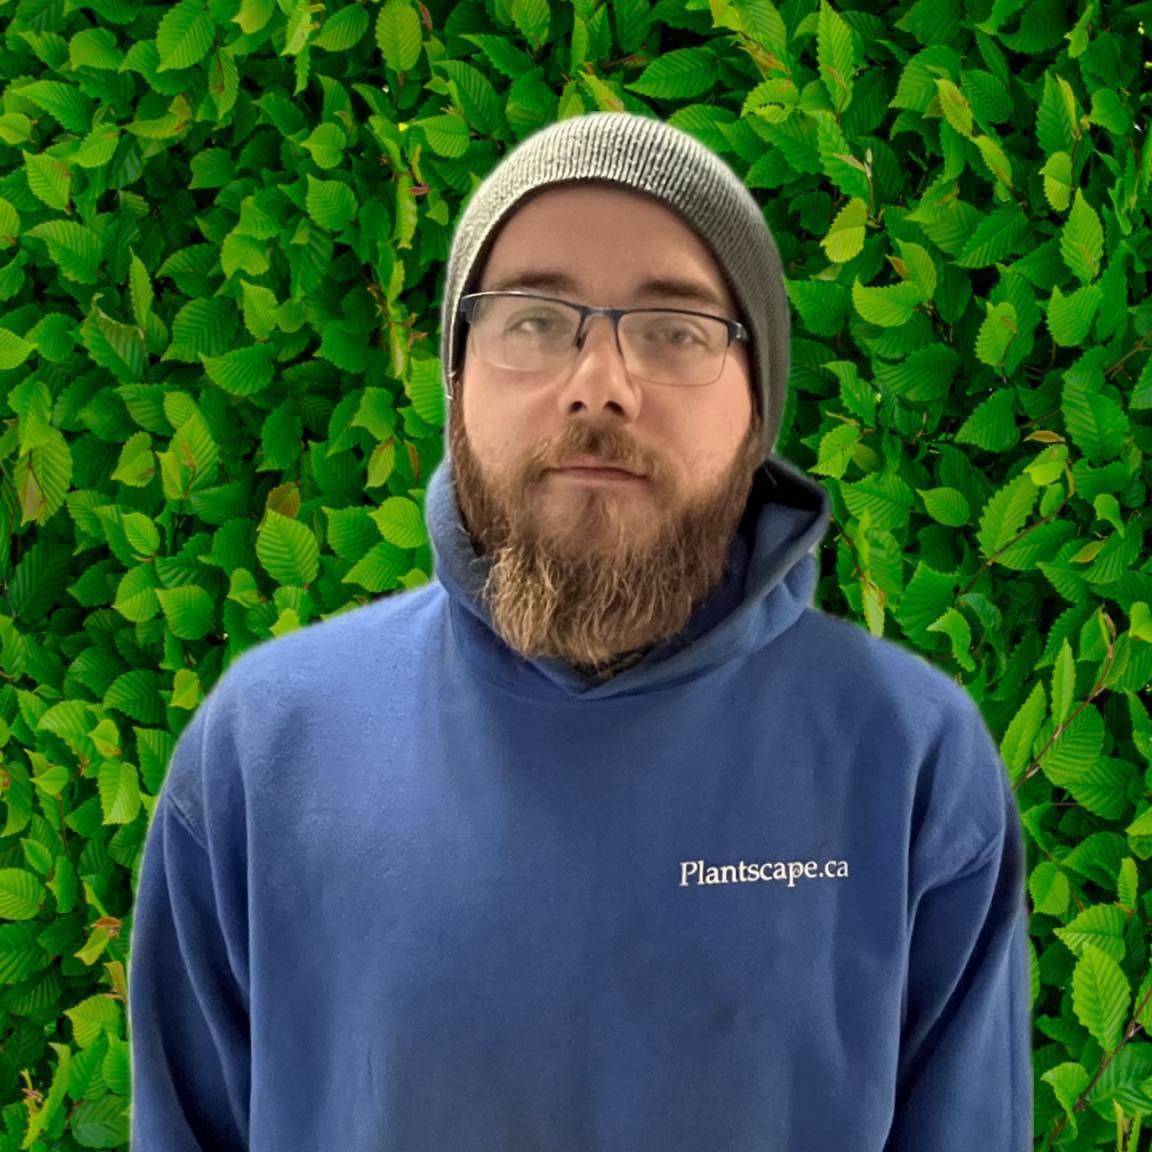 A person with a beard and glasses wearing a blue hoodie and gray beanie stands before a background of green leaves. The hoodie has "Plantscape.ca" printed on it.